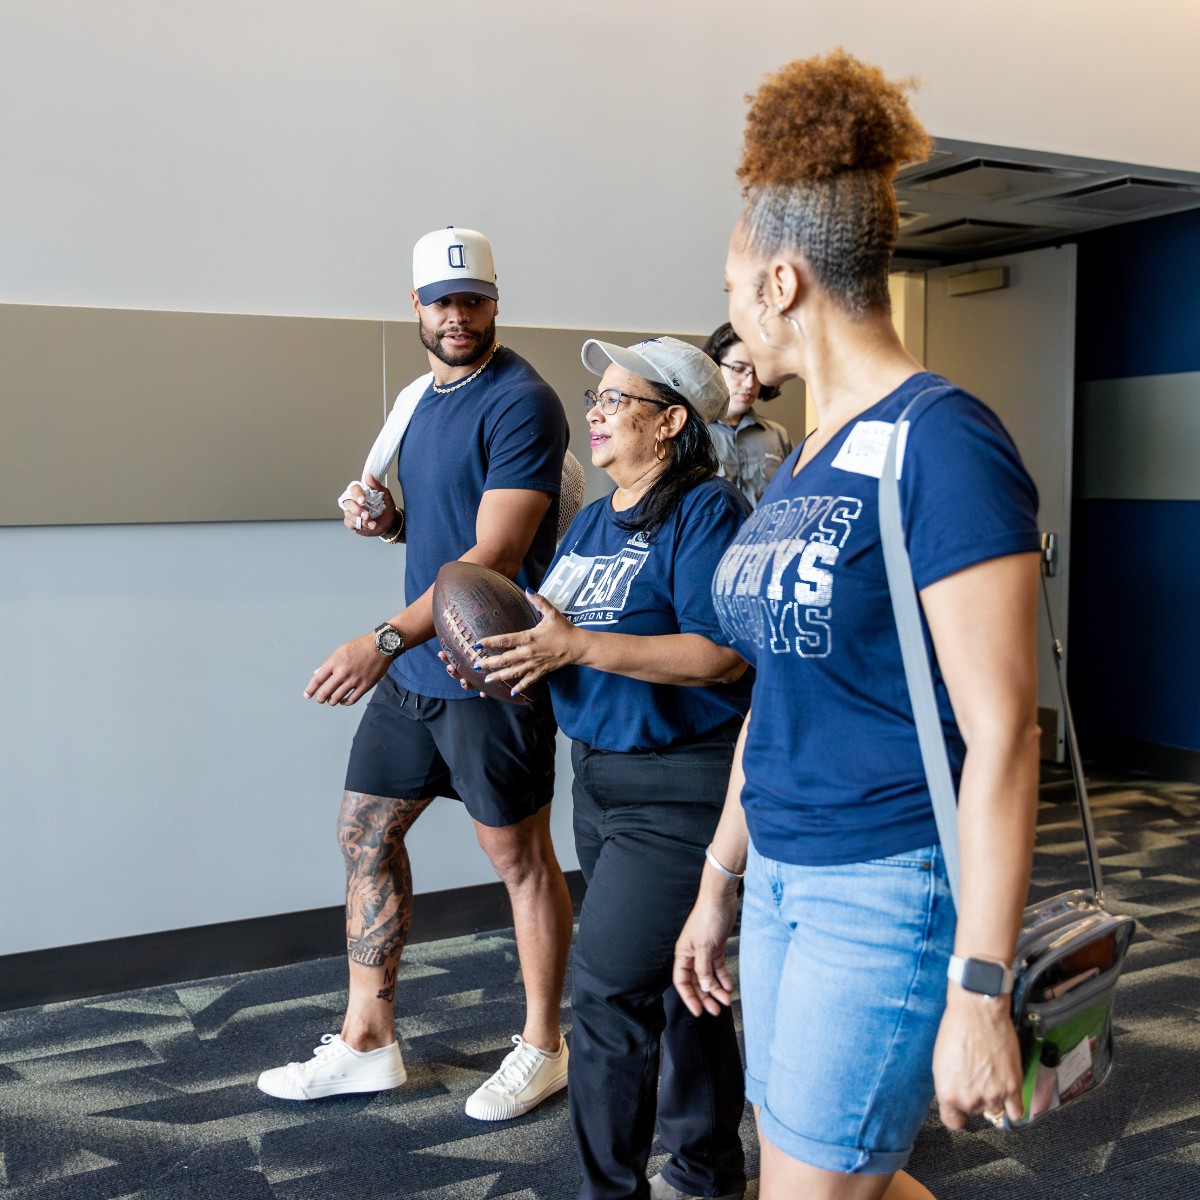 Look out, #alltroowinner Shennell C. is joining the NFL 👀🏈. Recently, Shennell and her guest got to experience what it’s like to be a Dallas Cowboys with Dak Prescott! Just know you’re living all of our dreams, Shennell.